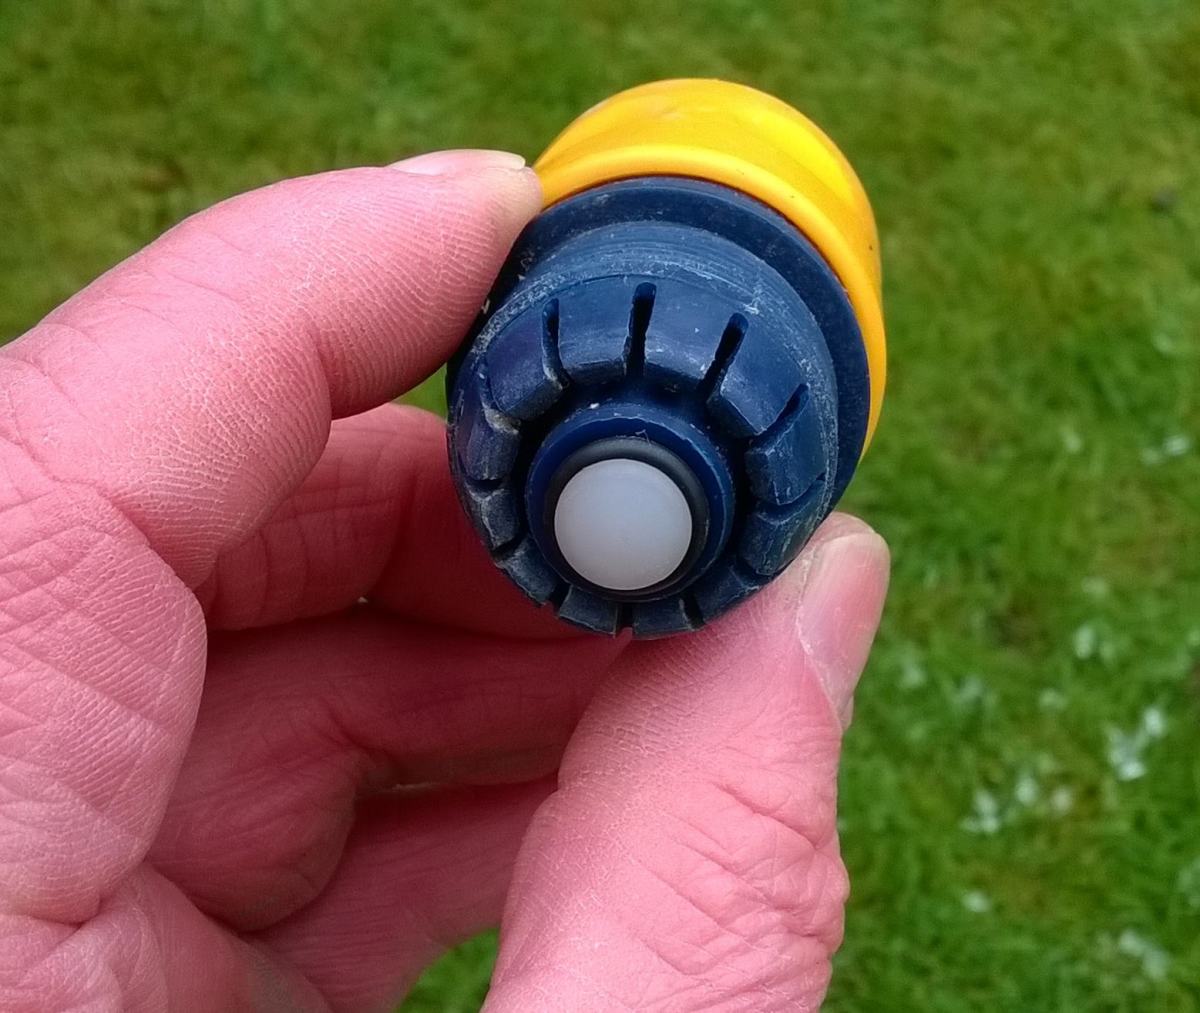 A valve in the connector stops water flow when the spray or other accessory is disconnected from the hose